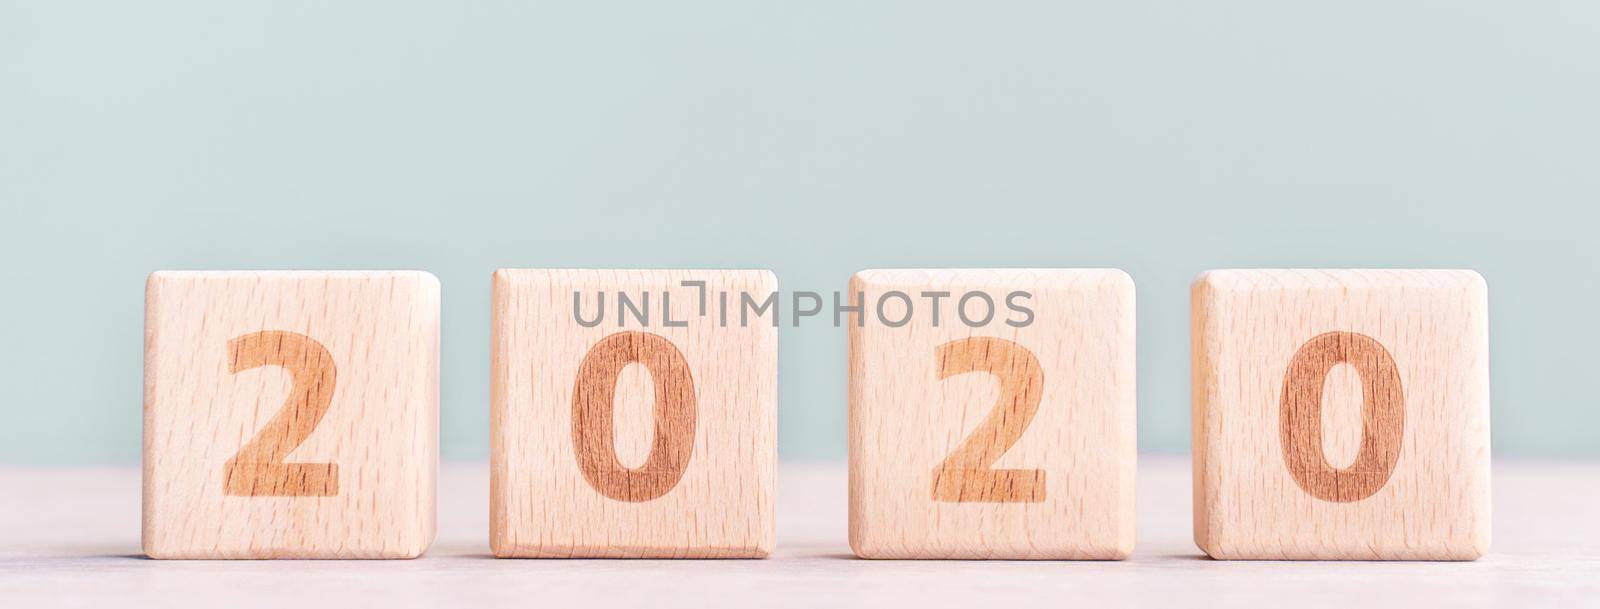 Abstract 2020, 2019 New year target plan design concept - wood blocks cubes on wooden table and pastel green background, close up, blank copy space.